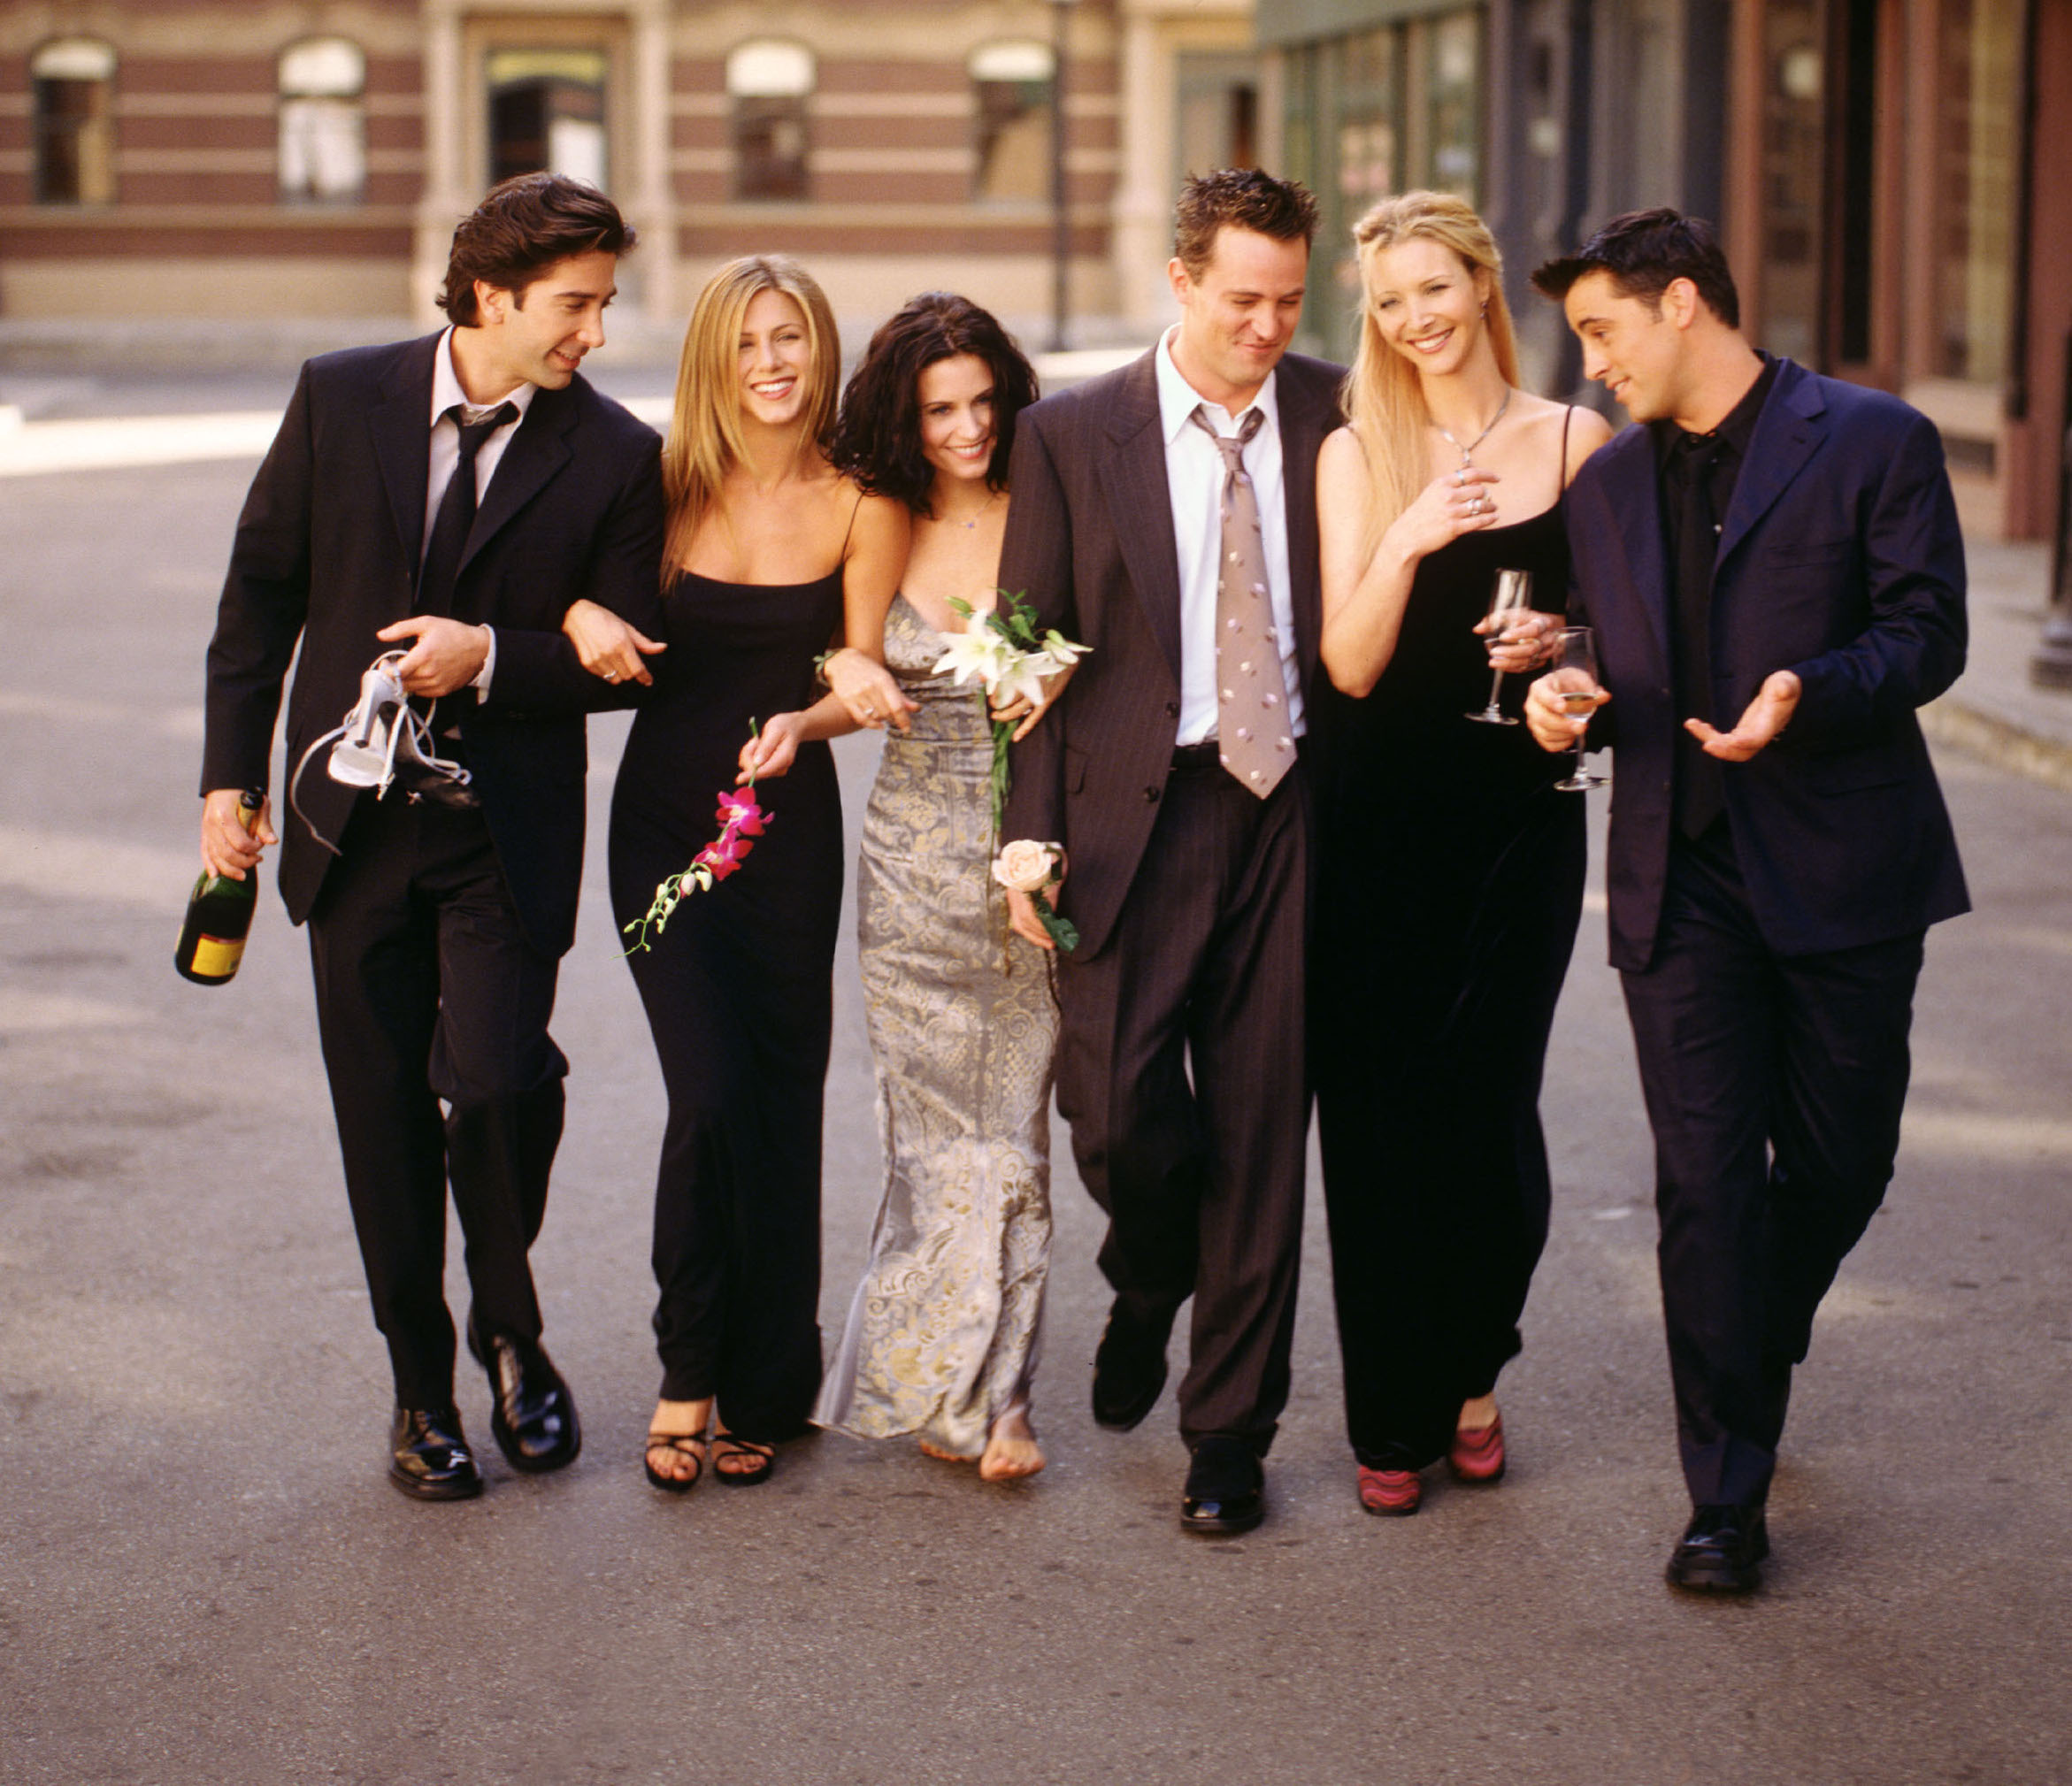 HBO Releases “Friends: The Reunion” Trailer